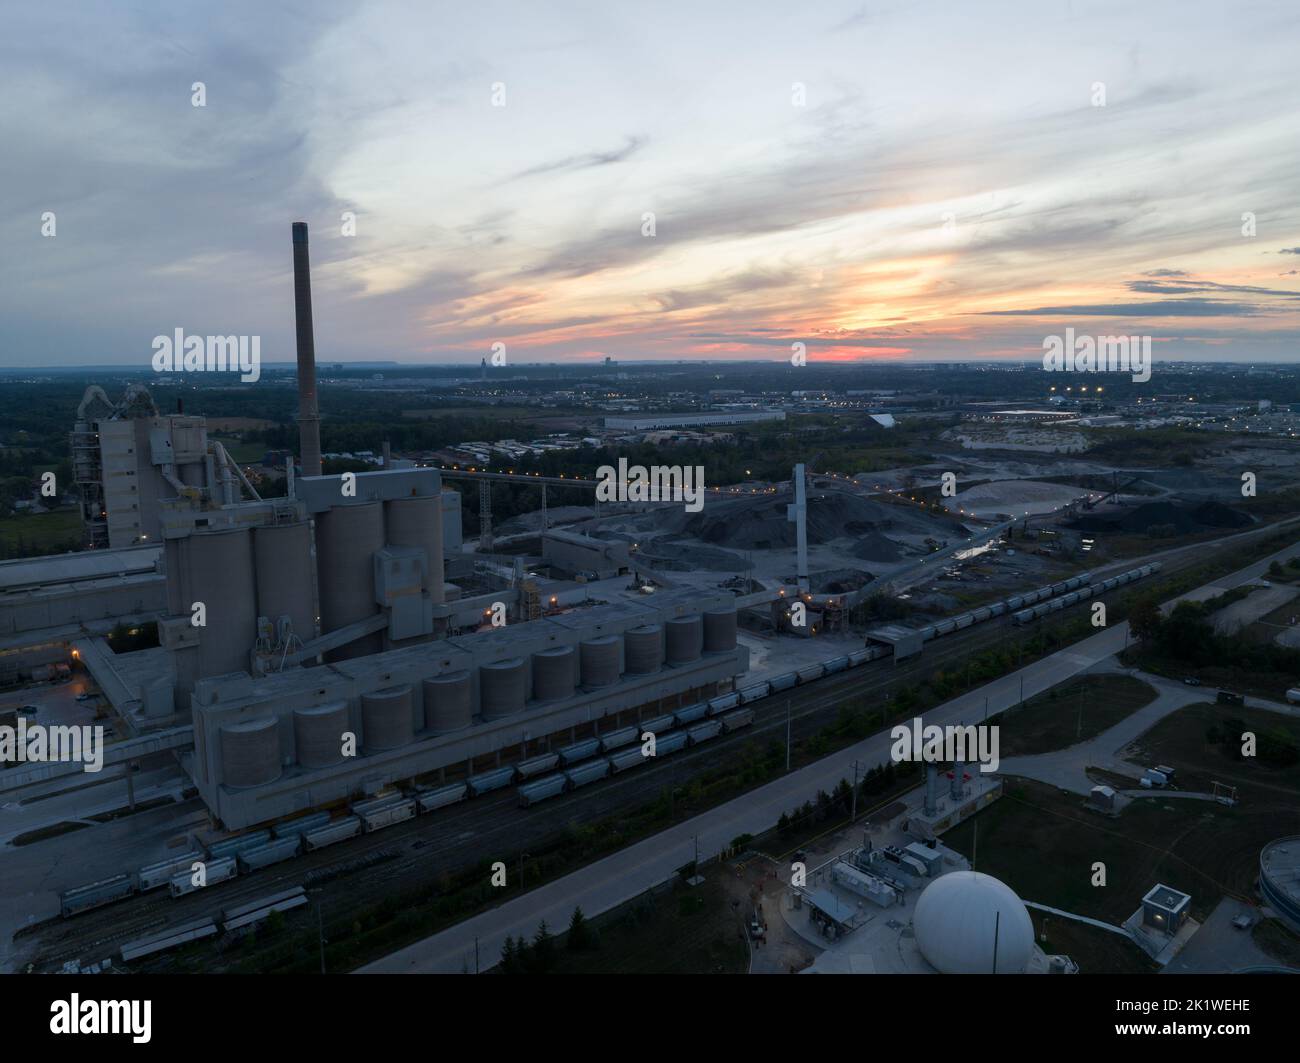 An aerial view looking at a large coal facility at dusk, a beautiful sky in the background. Stock Photo